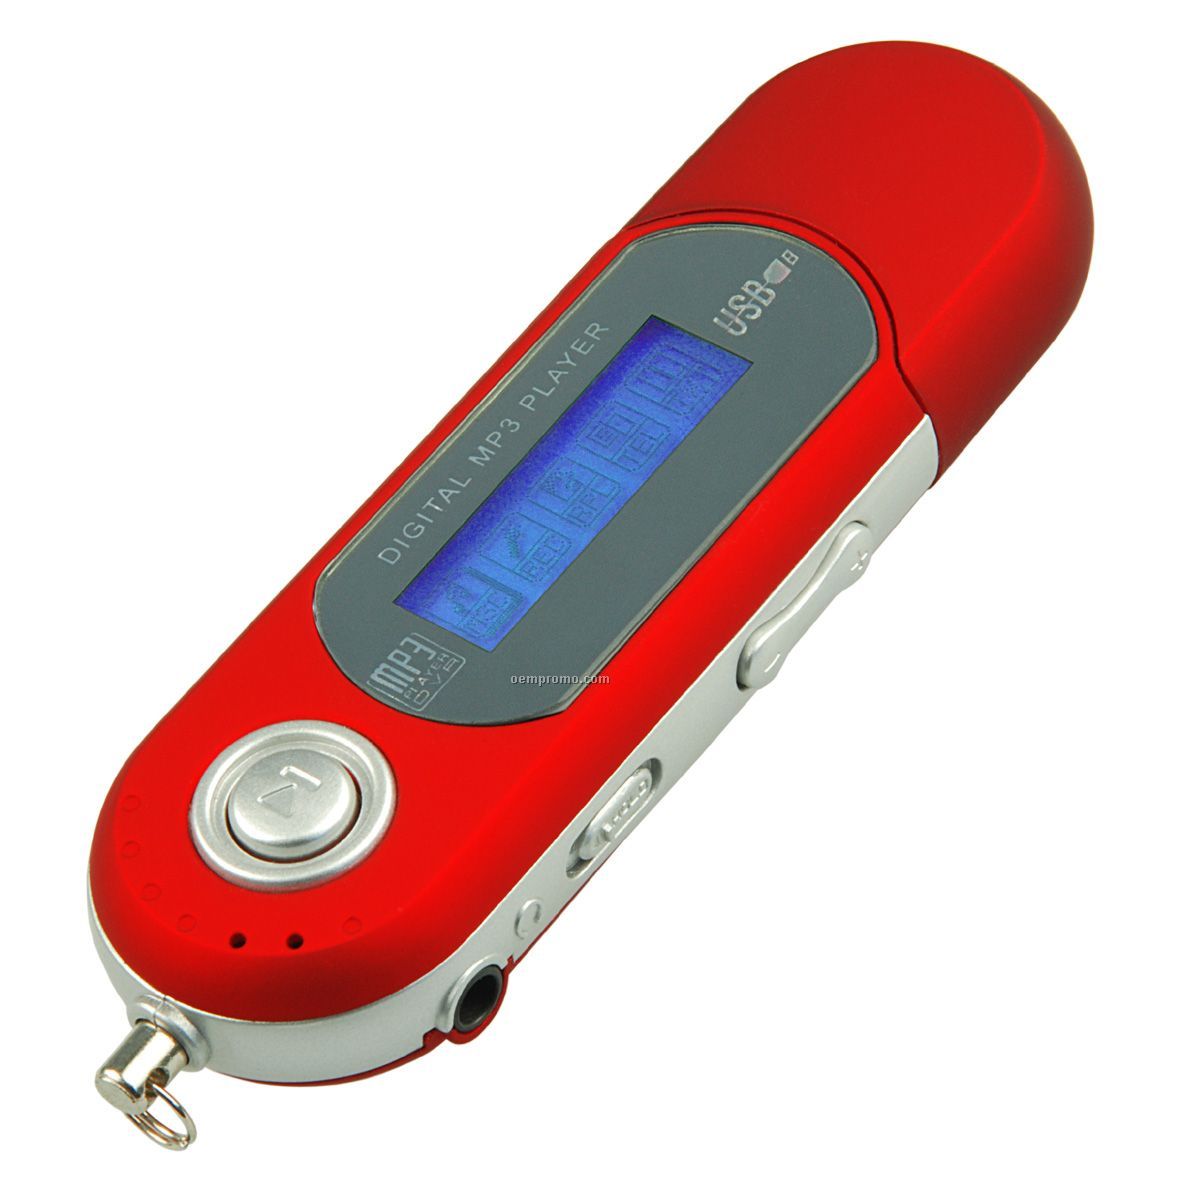 Mp3 Player With Curved Ends (2 Gb)